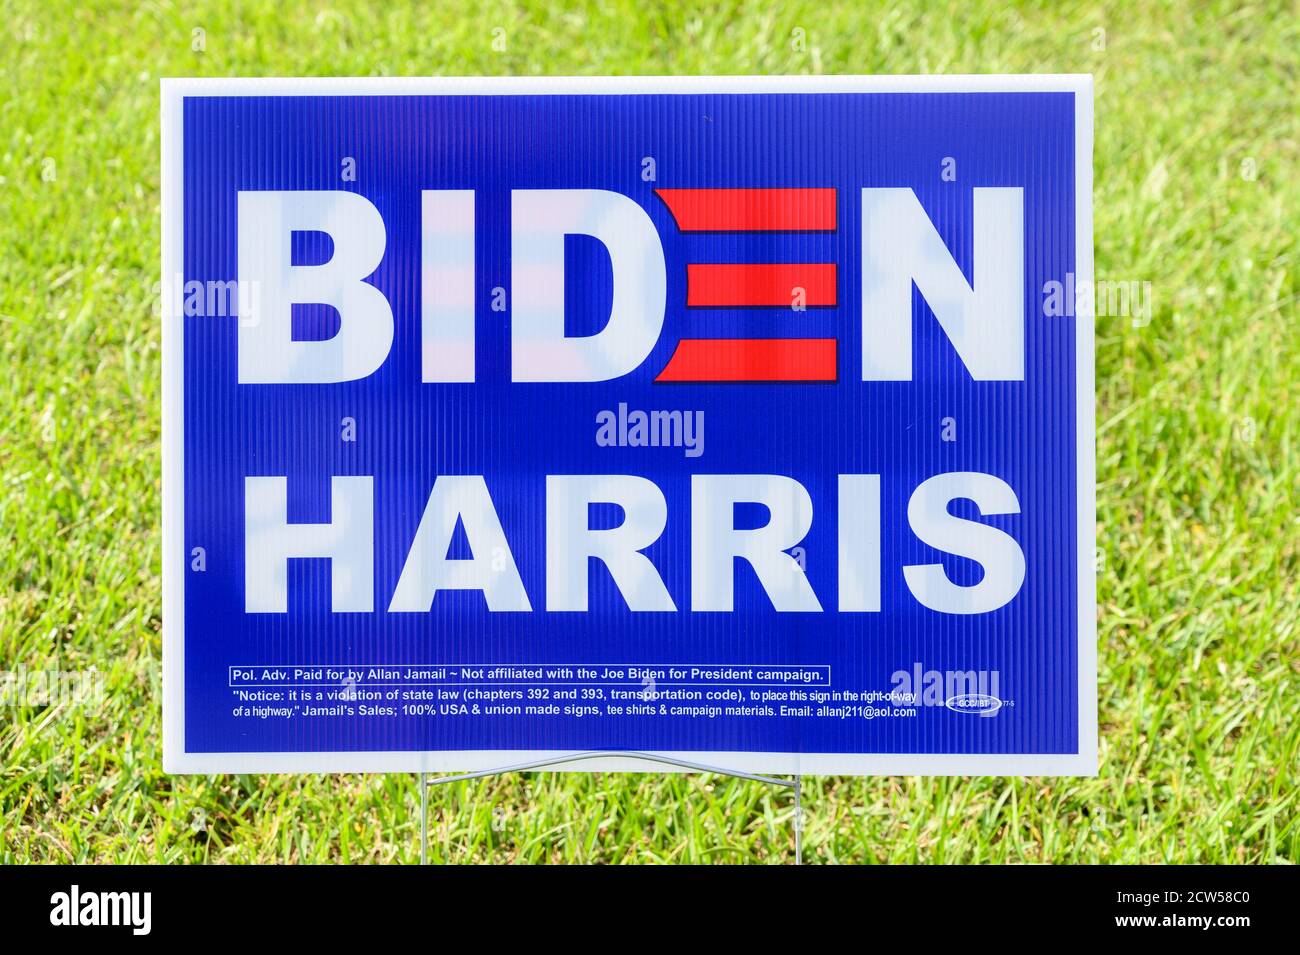 Stafford Texas - September 27, 2020: Biden Harris election signs are seen in many residential areas in Texas Stock Photo